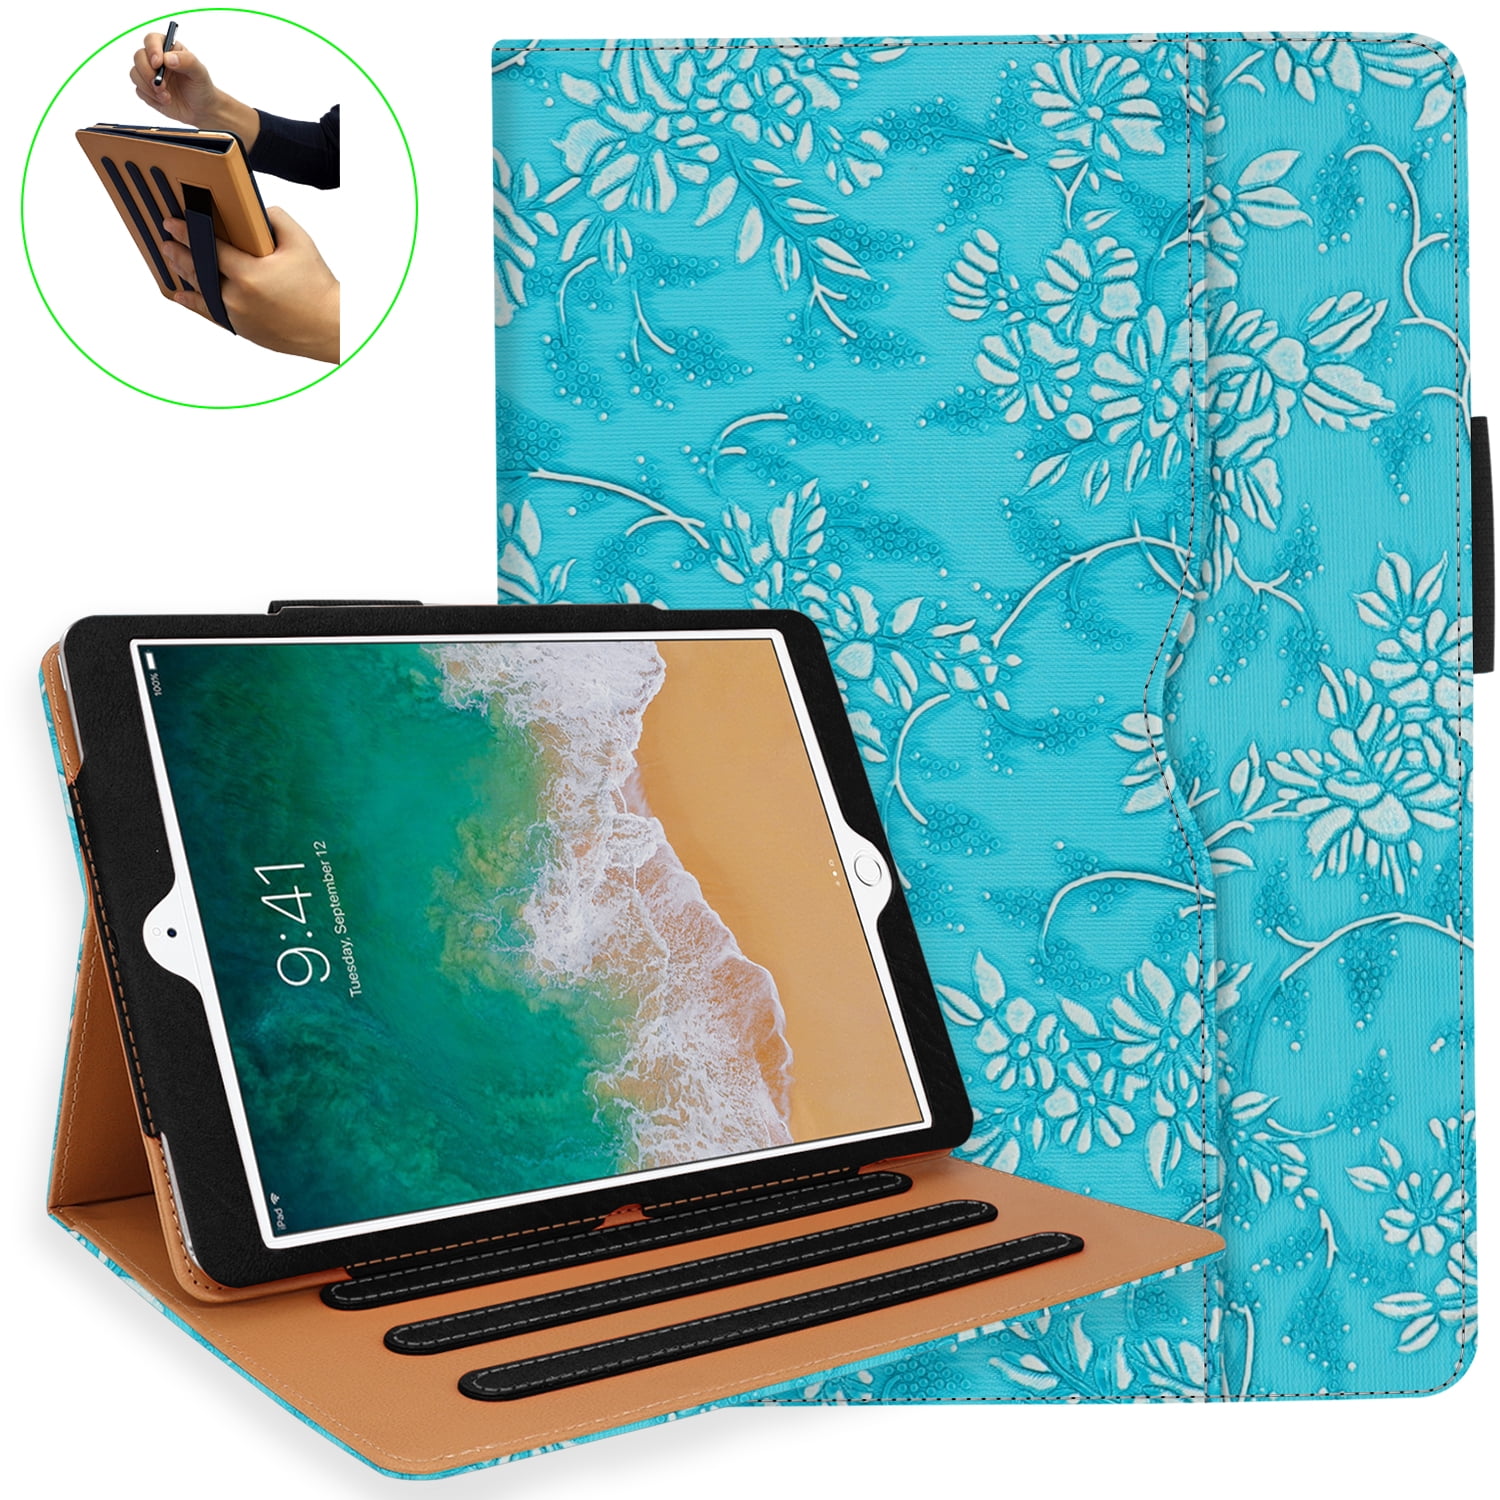 iPad 10.2 Case 2020, iPad 8th Generation Case with Pencil Holder MultiAngle Stand, Hand Strap